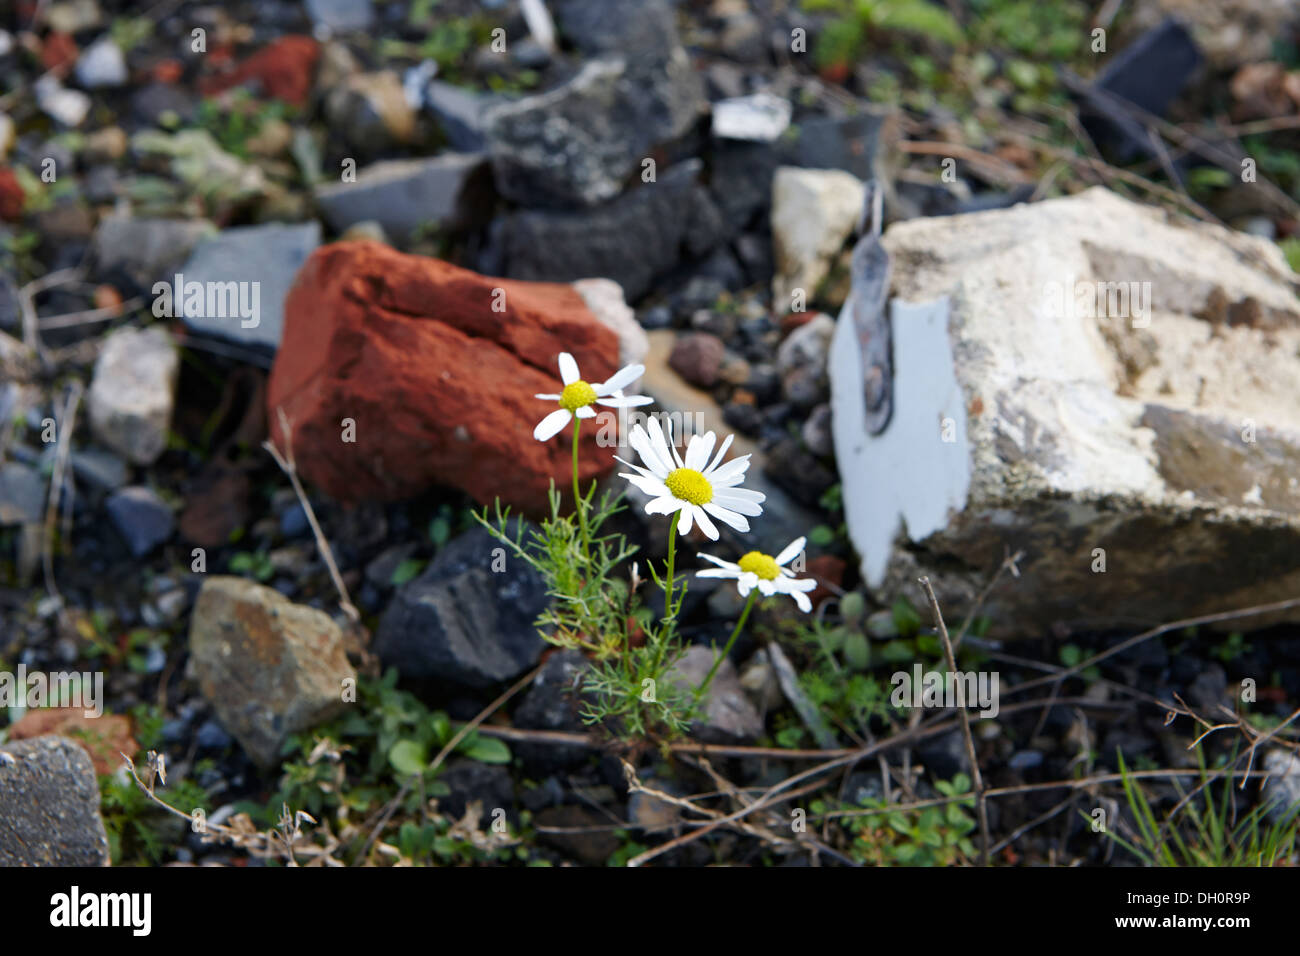 daisy growing up through building rubble on waste ground Stock Photo